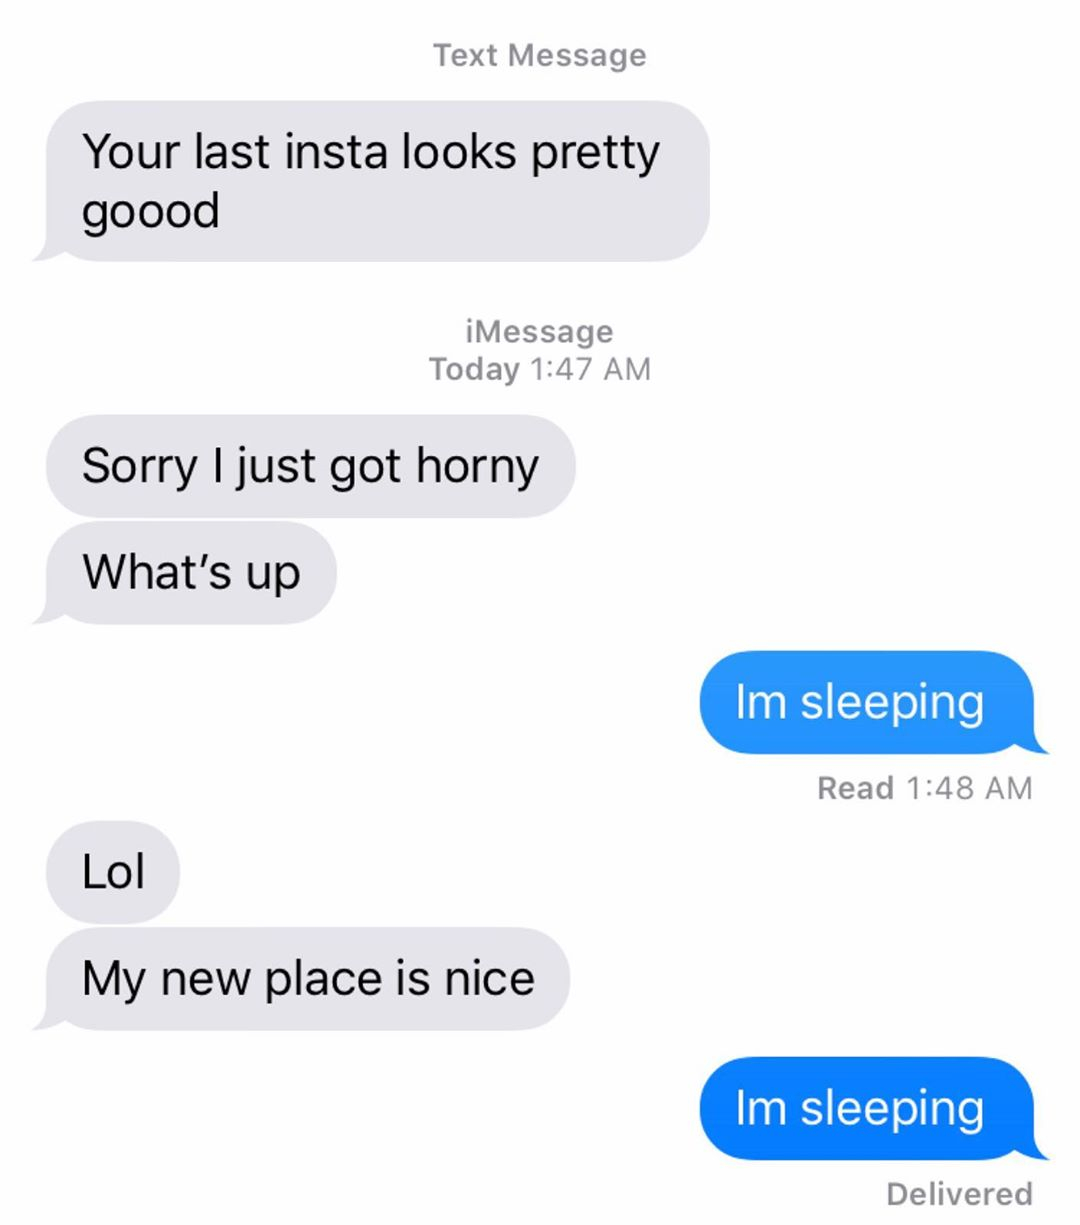 organization - Text Message Your last insta looks pretty goood iMessage Today Sorry I just got horny What's up Im sleeping Read Lol My new place is nice Im sleeping Delivered